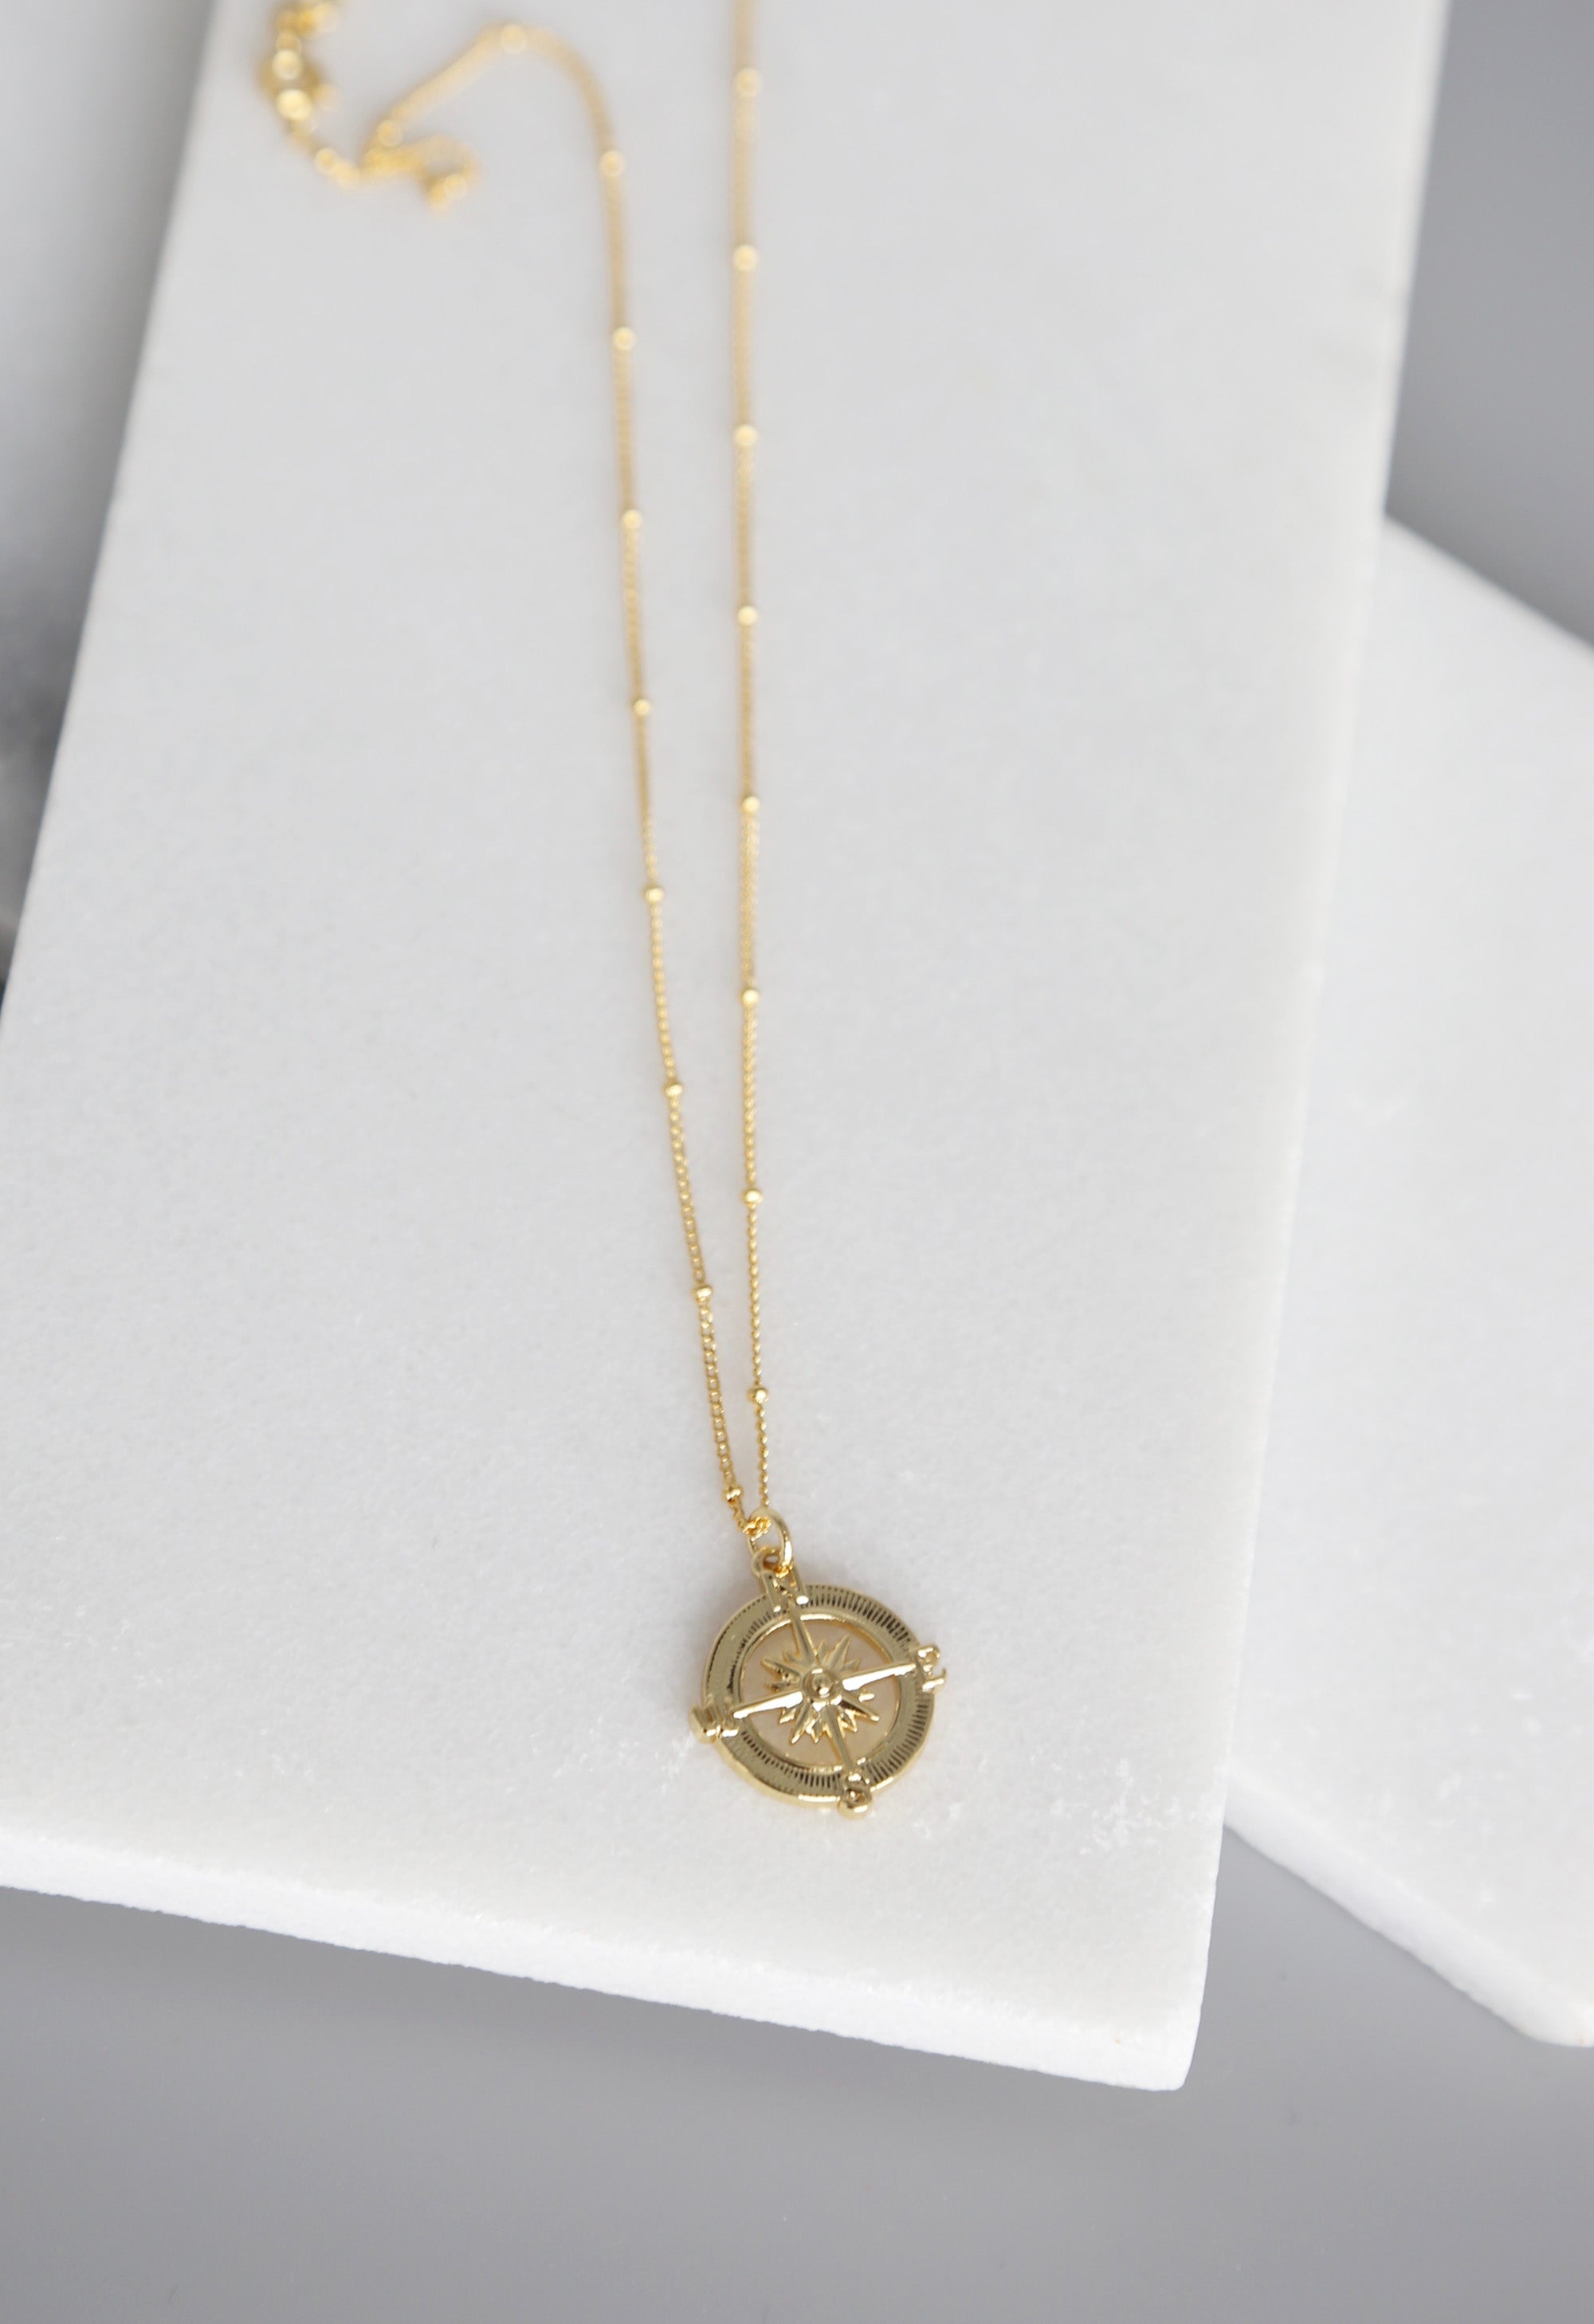 Gold Compass Necklace, Gold Necklace, Dainty Gold Jewelry, Celestial, Gold Chain, Luminous Collection